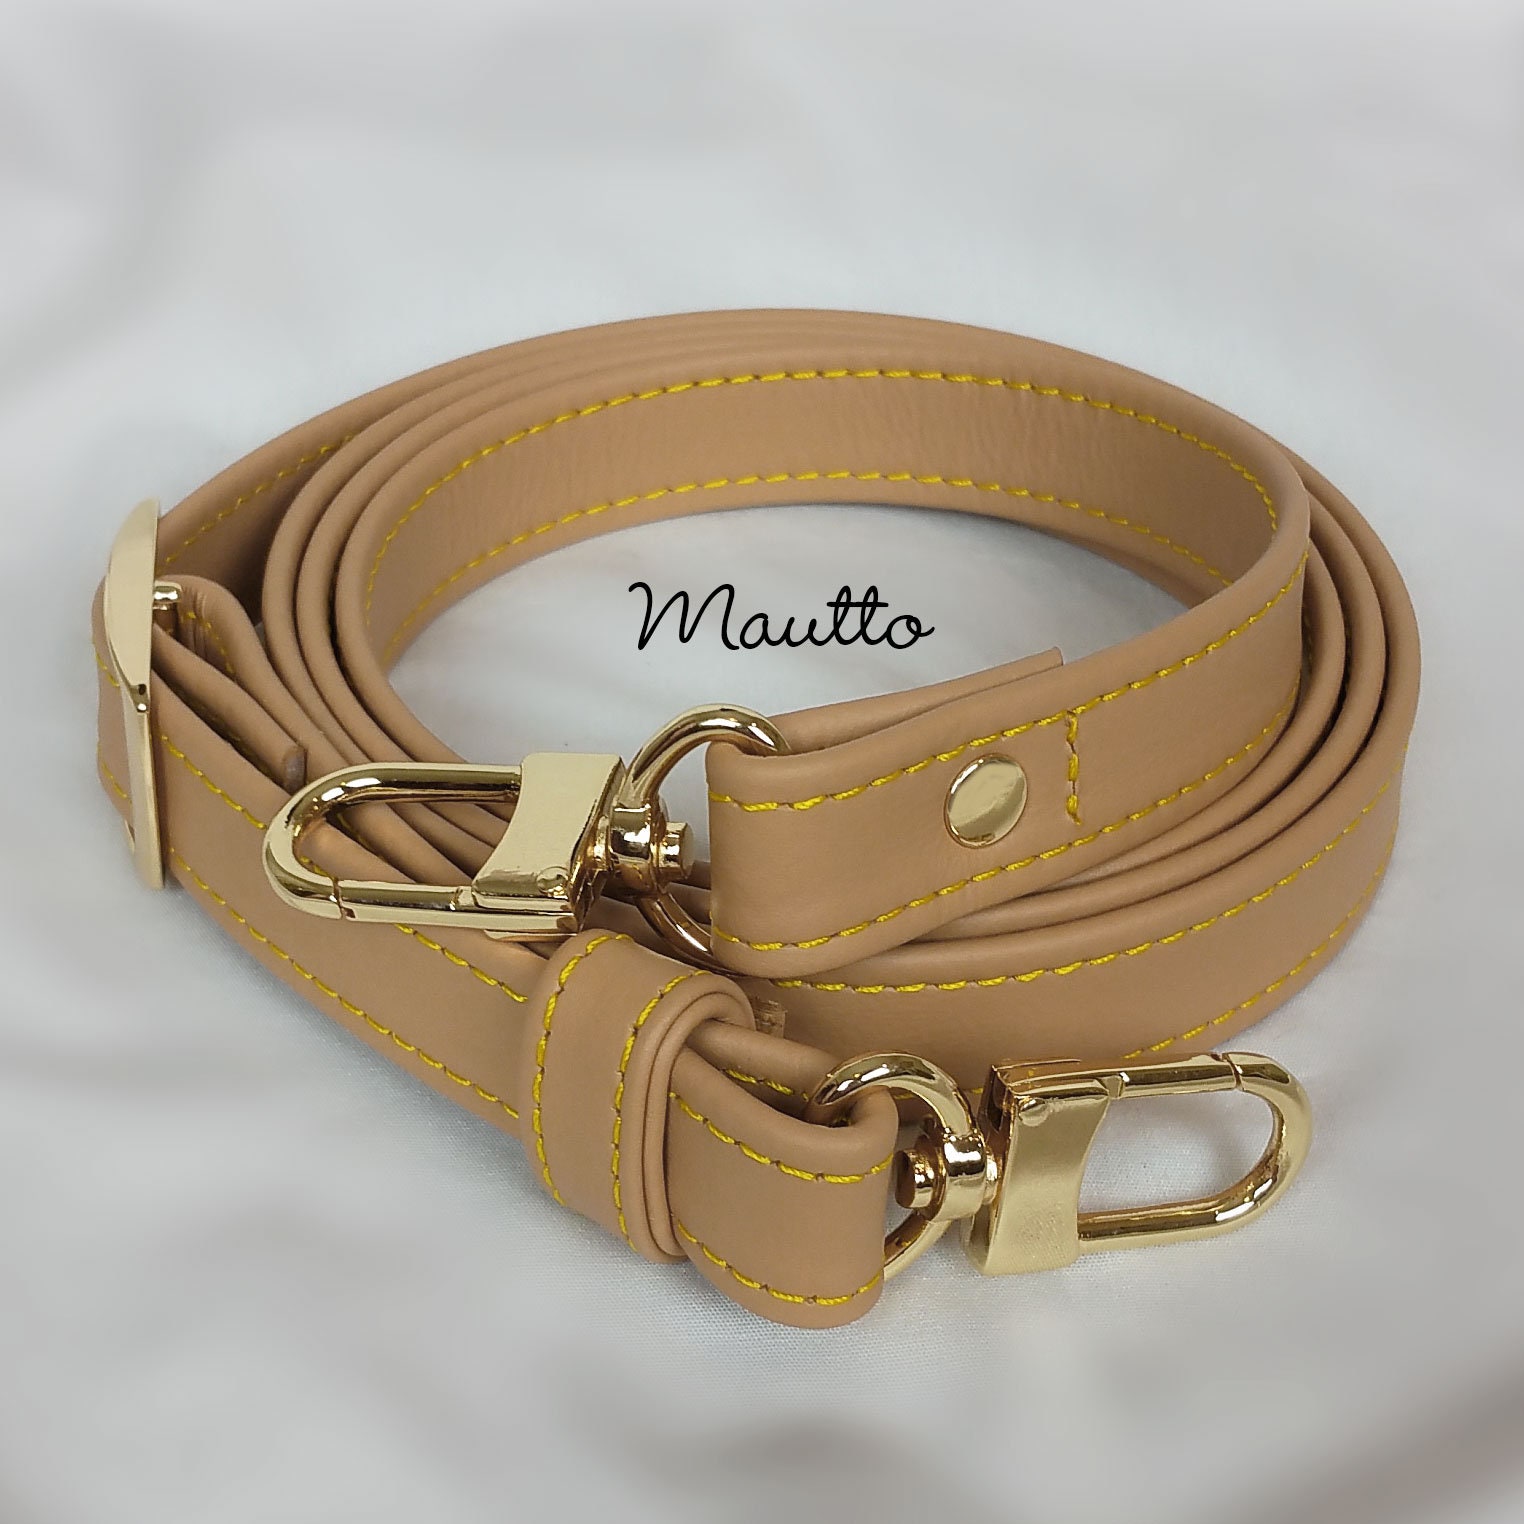 Dark Tan Leather Strap with Yellow Stitching for Louis Vuitton (LV), Coach  & More - .5 Petite Width, Replacement Purse Straps & Handbag Accessories  - Leather, Chain & more